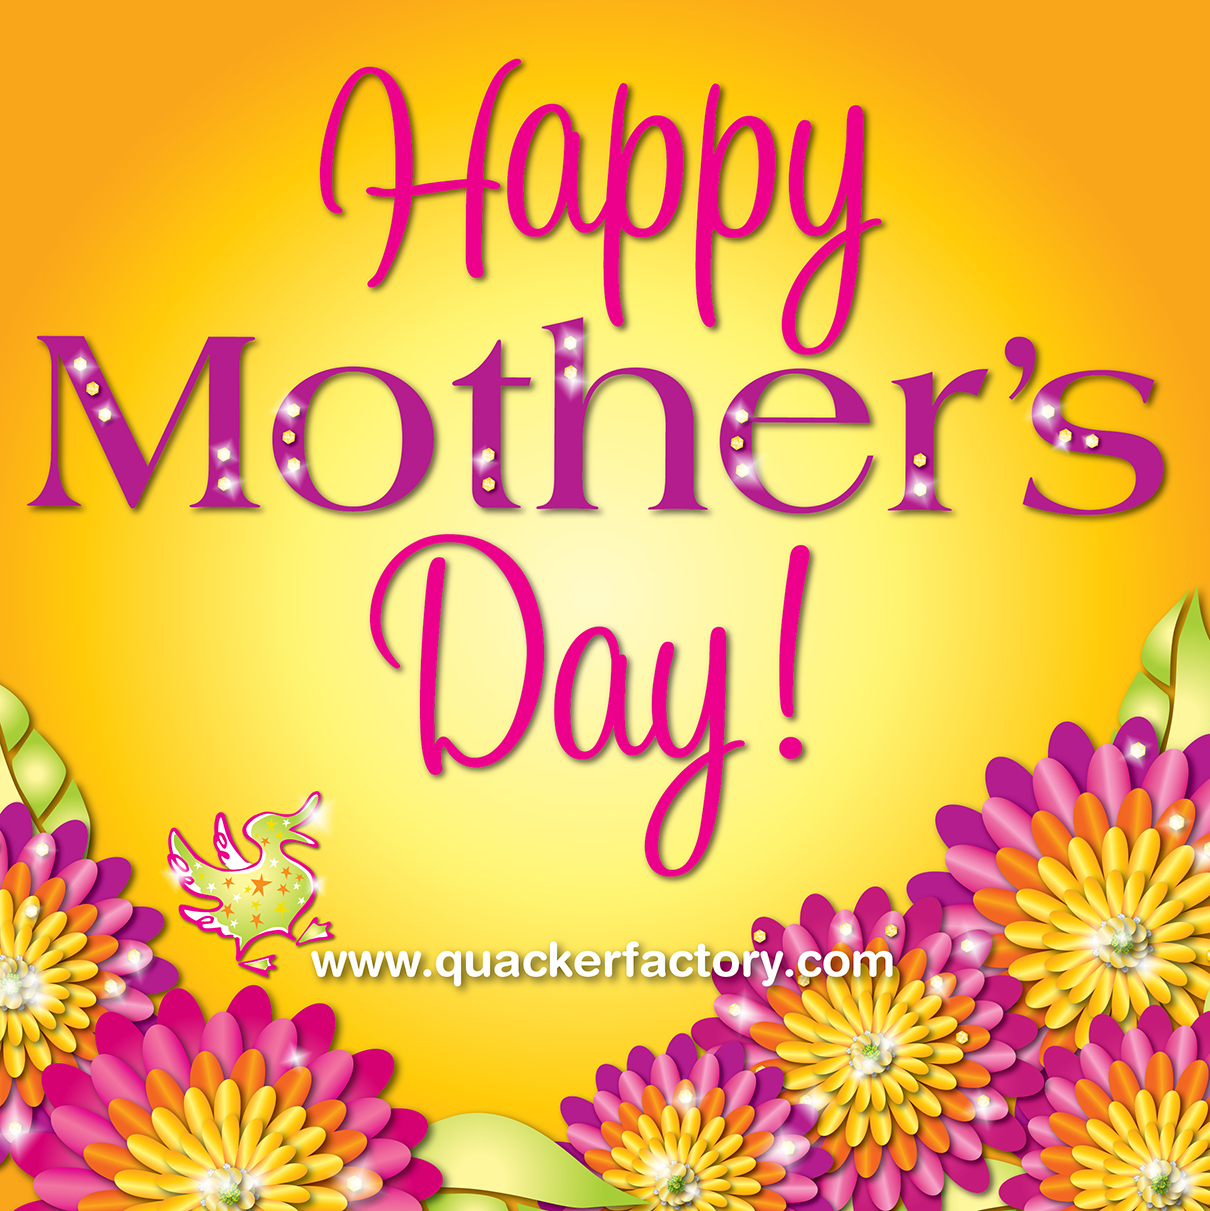 Happy Mothers Day from Quacker Factory!